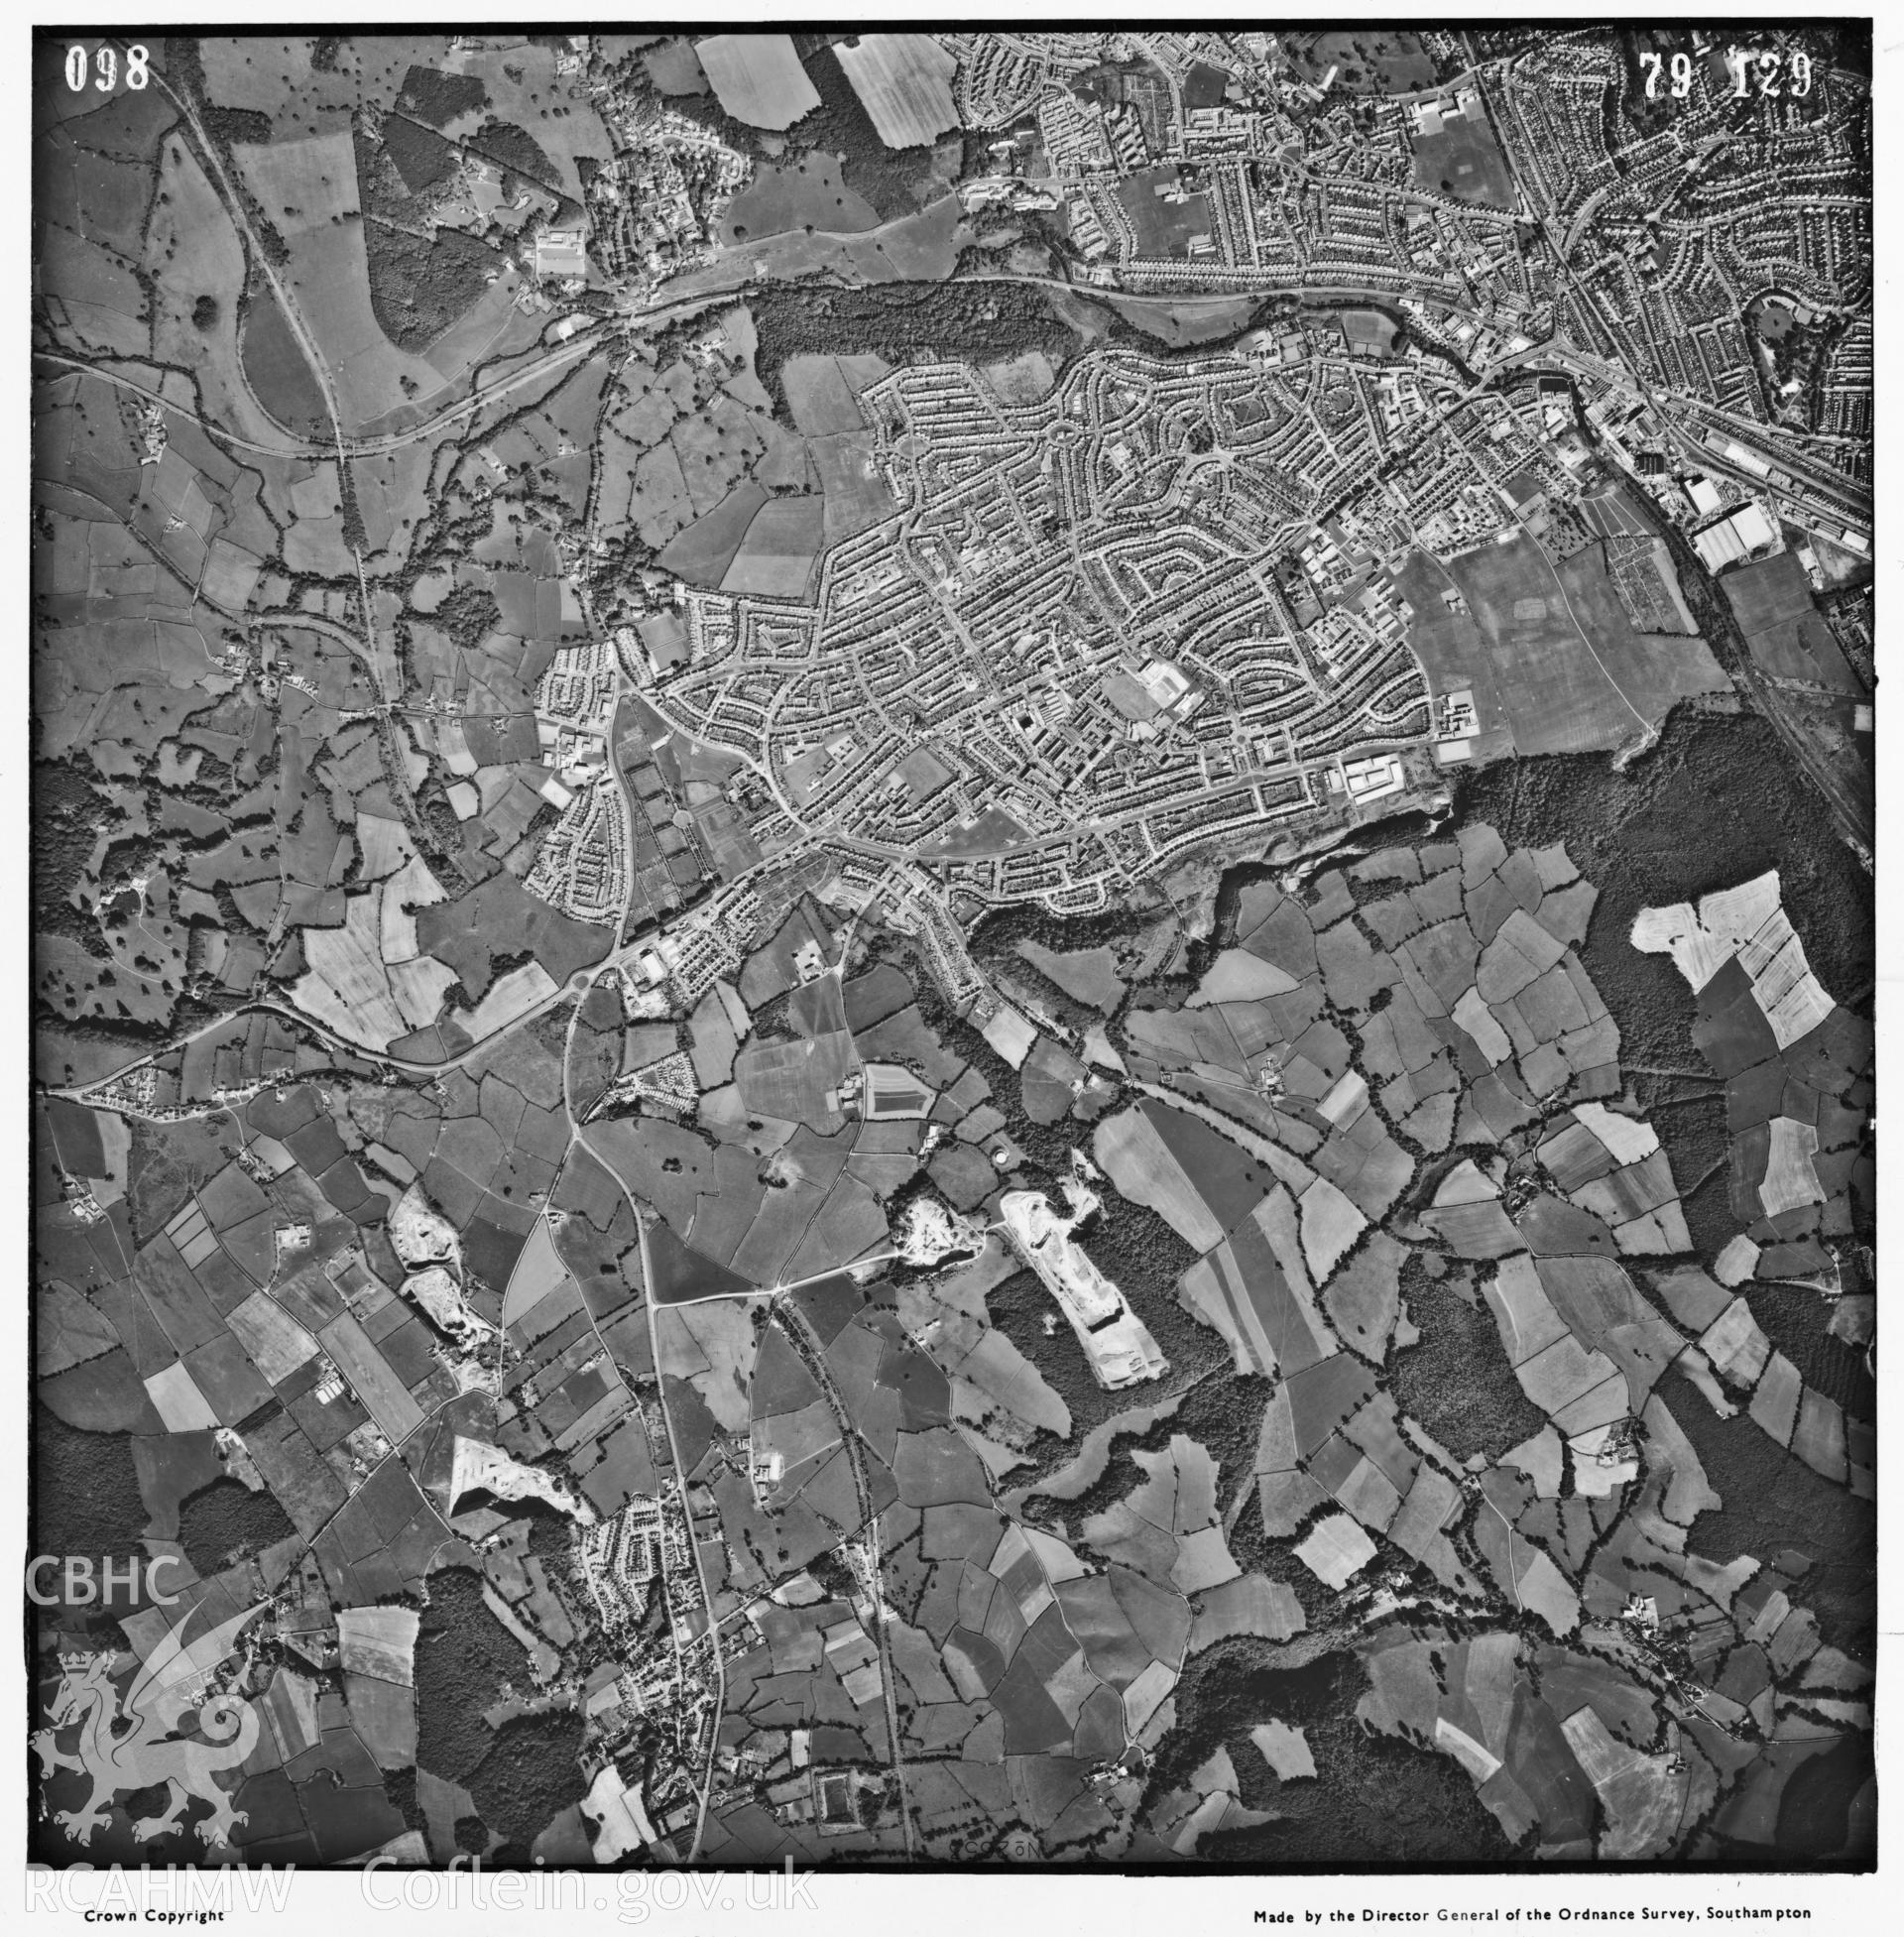 Digitized copy of an aerial photograph showing area to the south-west of Cardiff, taken by Ordnance Survey, 1979.